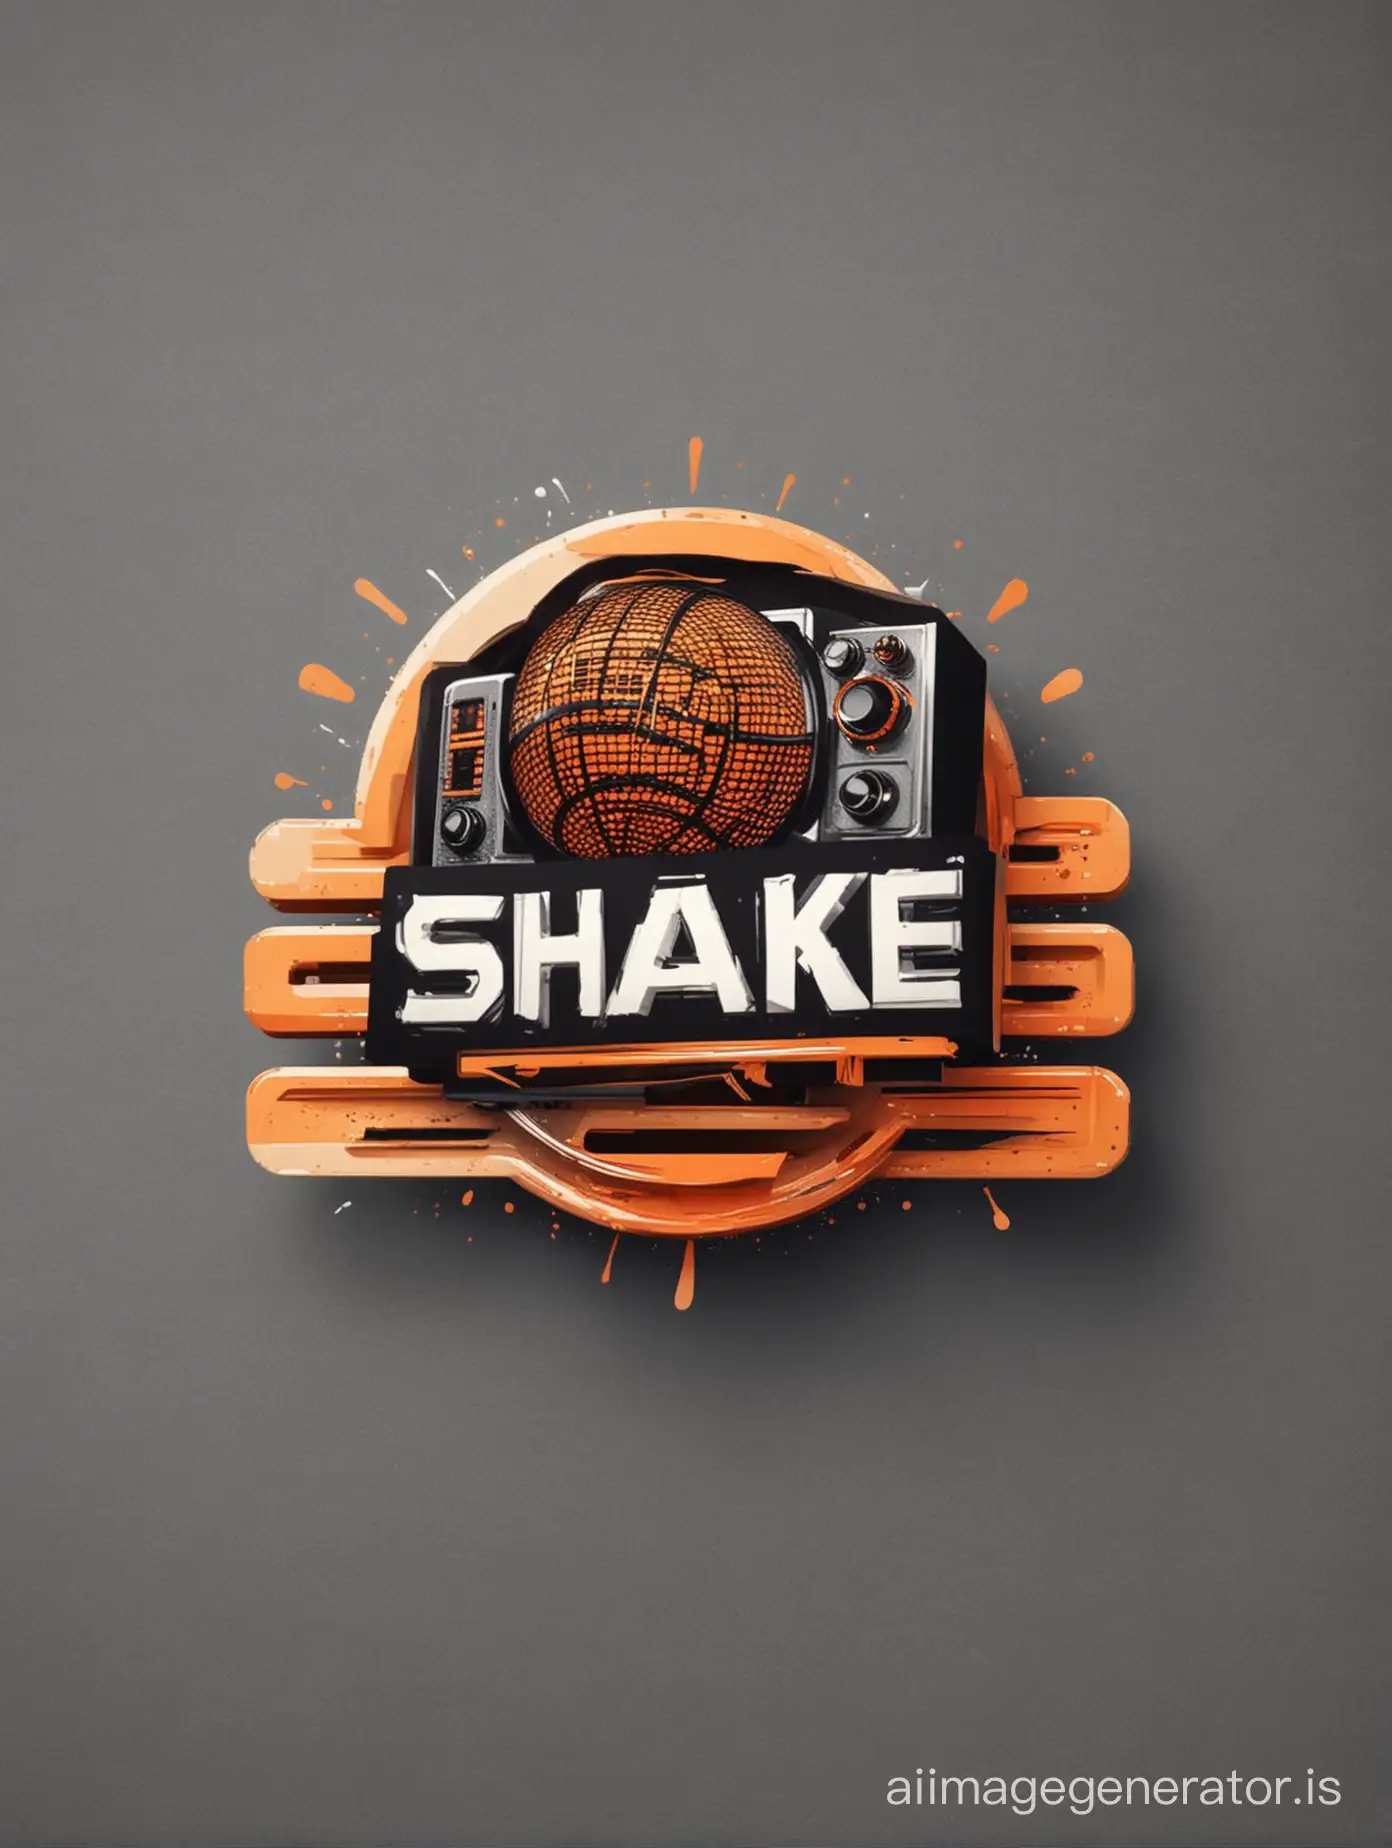 create a simple logo for a radio station called shake-NL on a transparant background